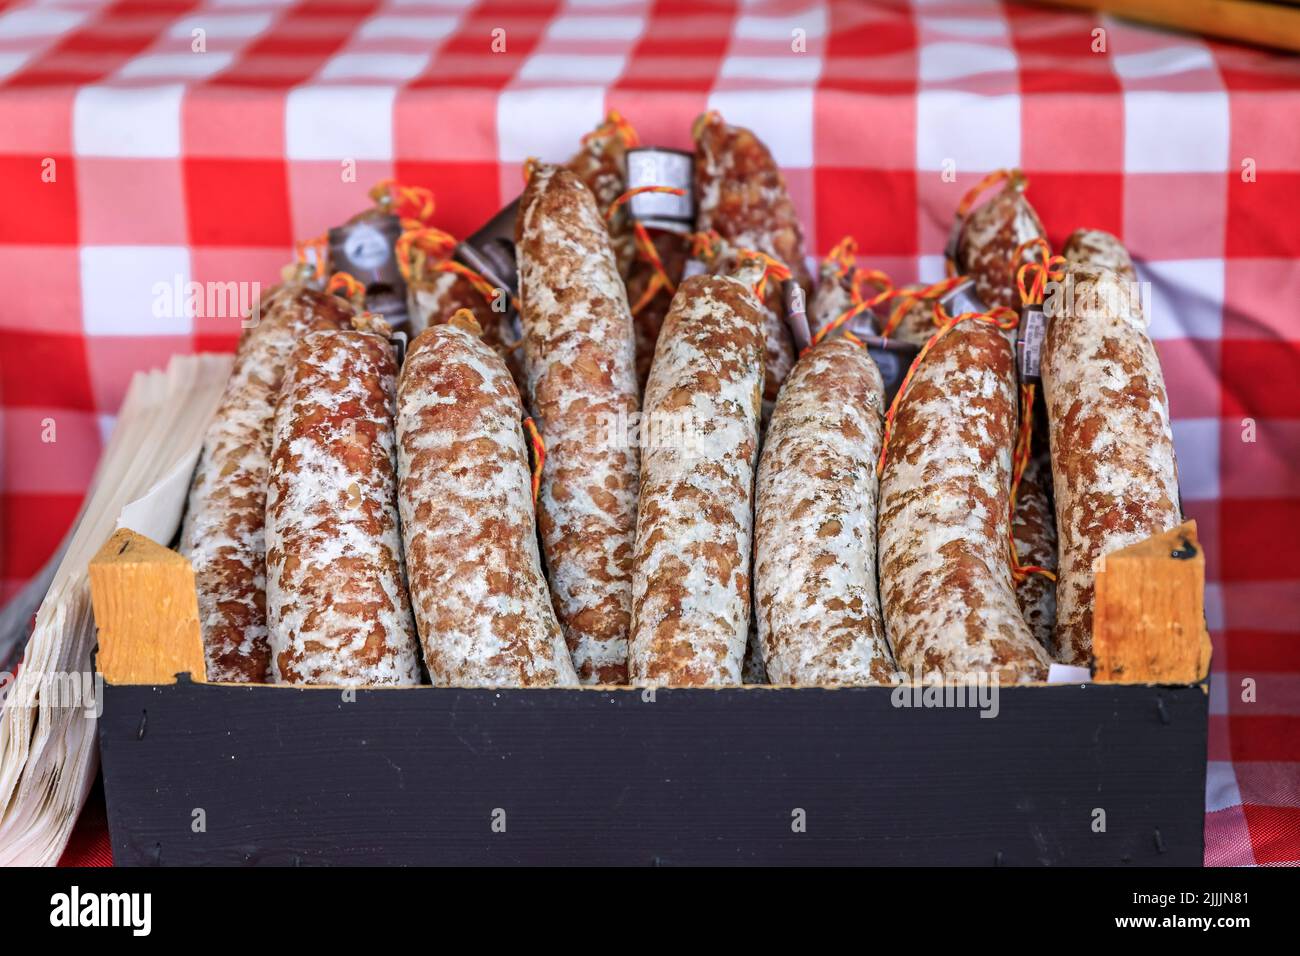 Artisanal sausage in a box on a stand at a local farmers market Cours Saleya in Old Town, Vieille Ville in Nice, French Riviera, France Stock Photo